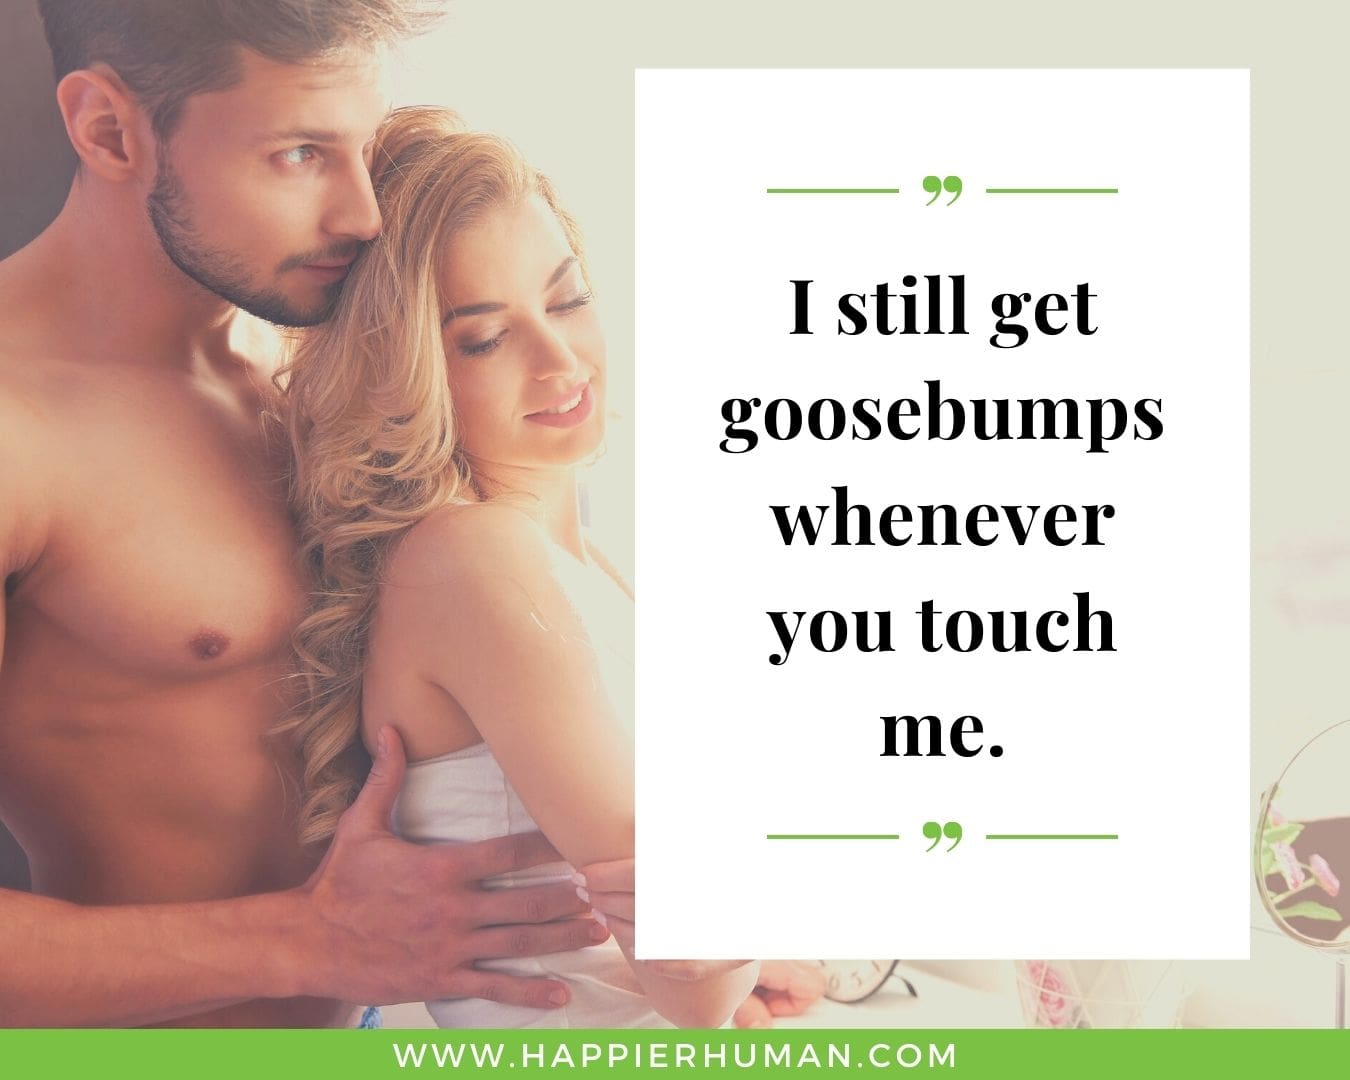 Short simple quotes of love and affection - “I still get goosebumps whenever you touch me.”